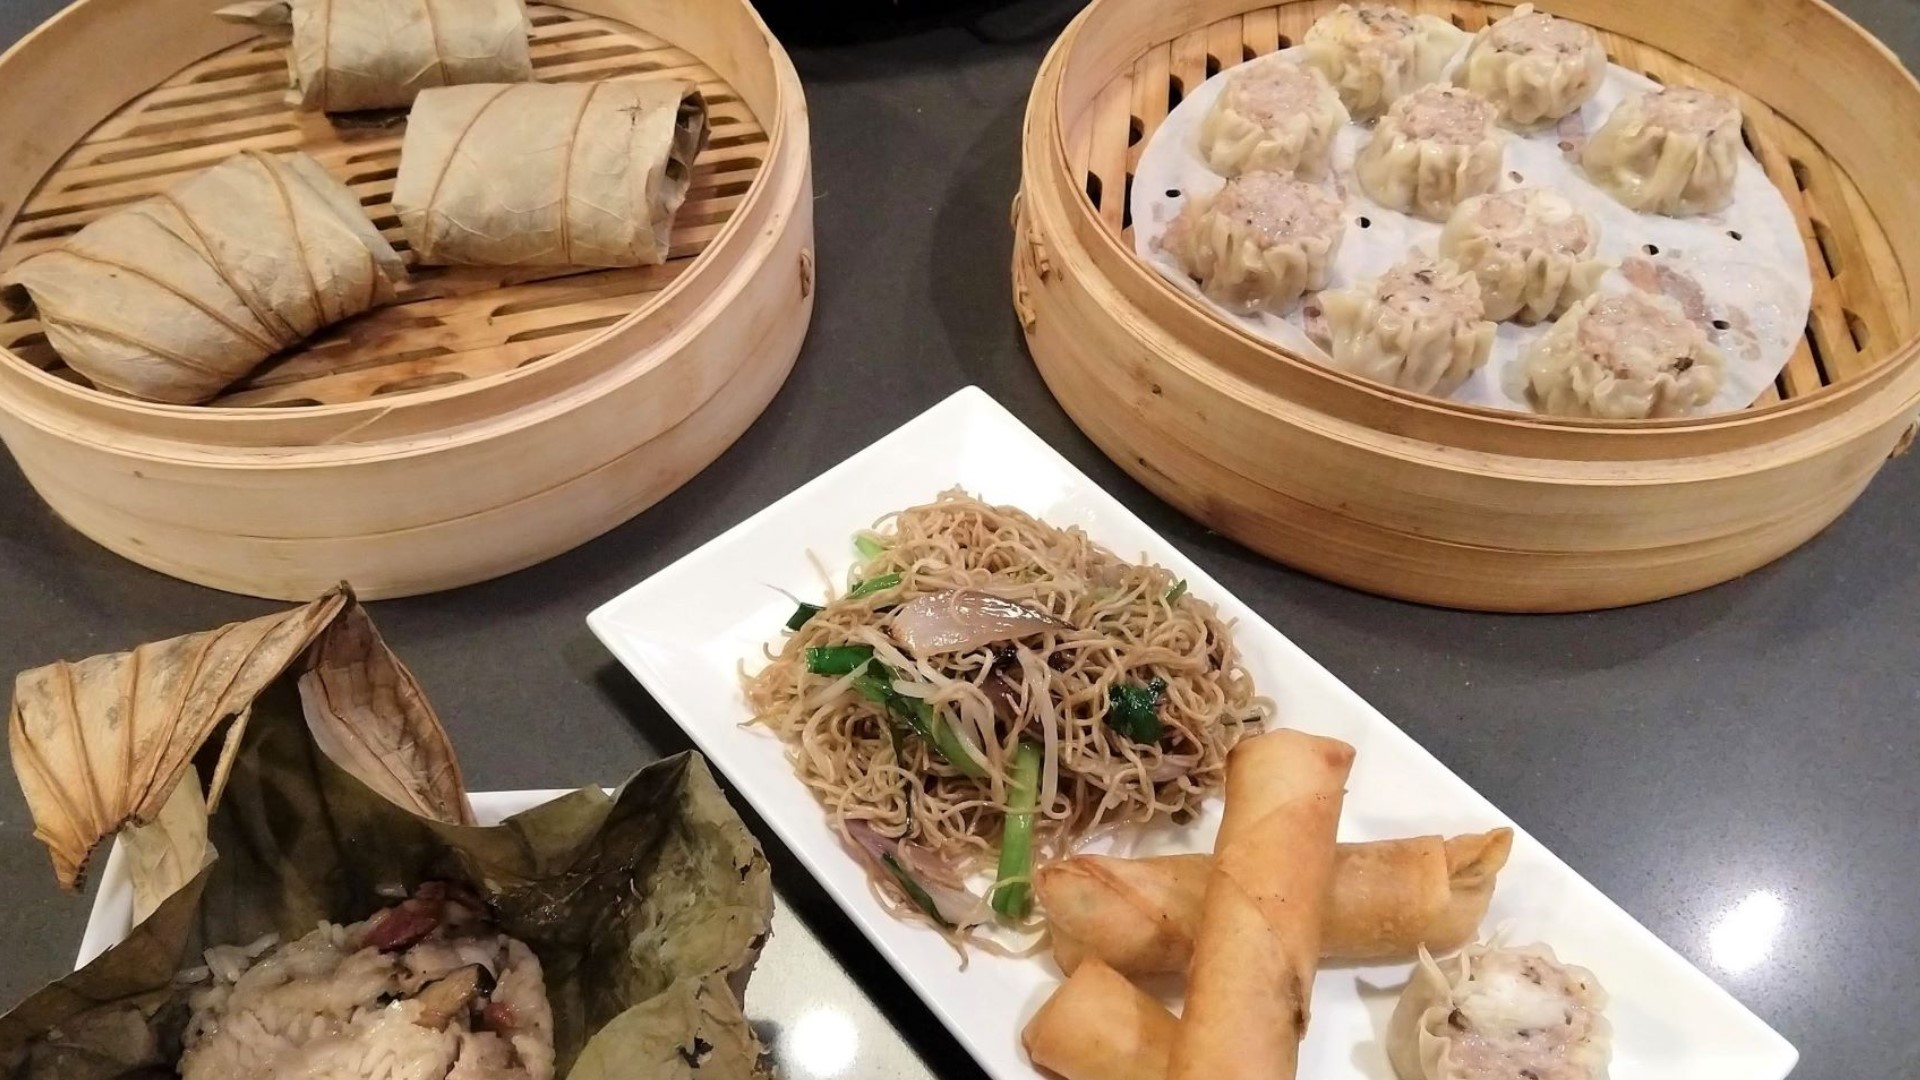 Culinary instructor Thanh Tang makes crab and pork shu mai and shows off other Dim Sum dishes for your next gathering.